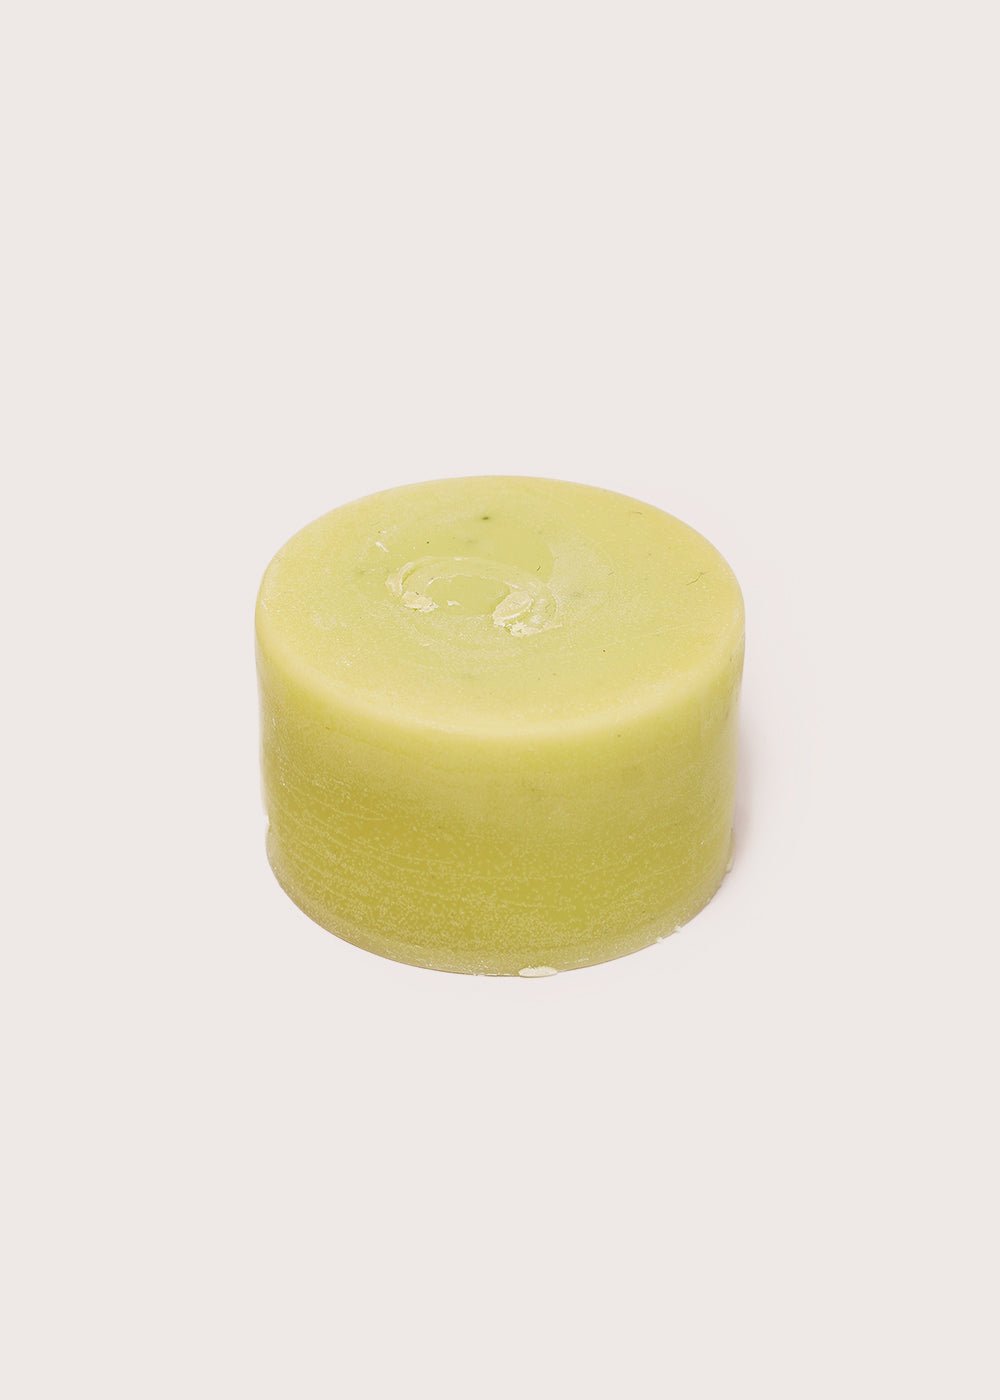 Jack59 Serenity Conditioner Bar - New Classics Studios Sustainable Ethical Fashion Canada